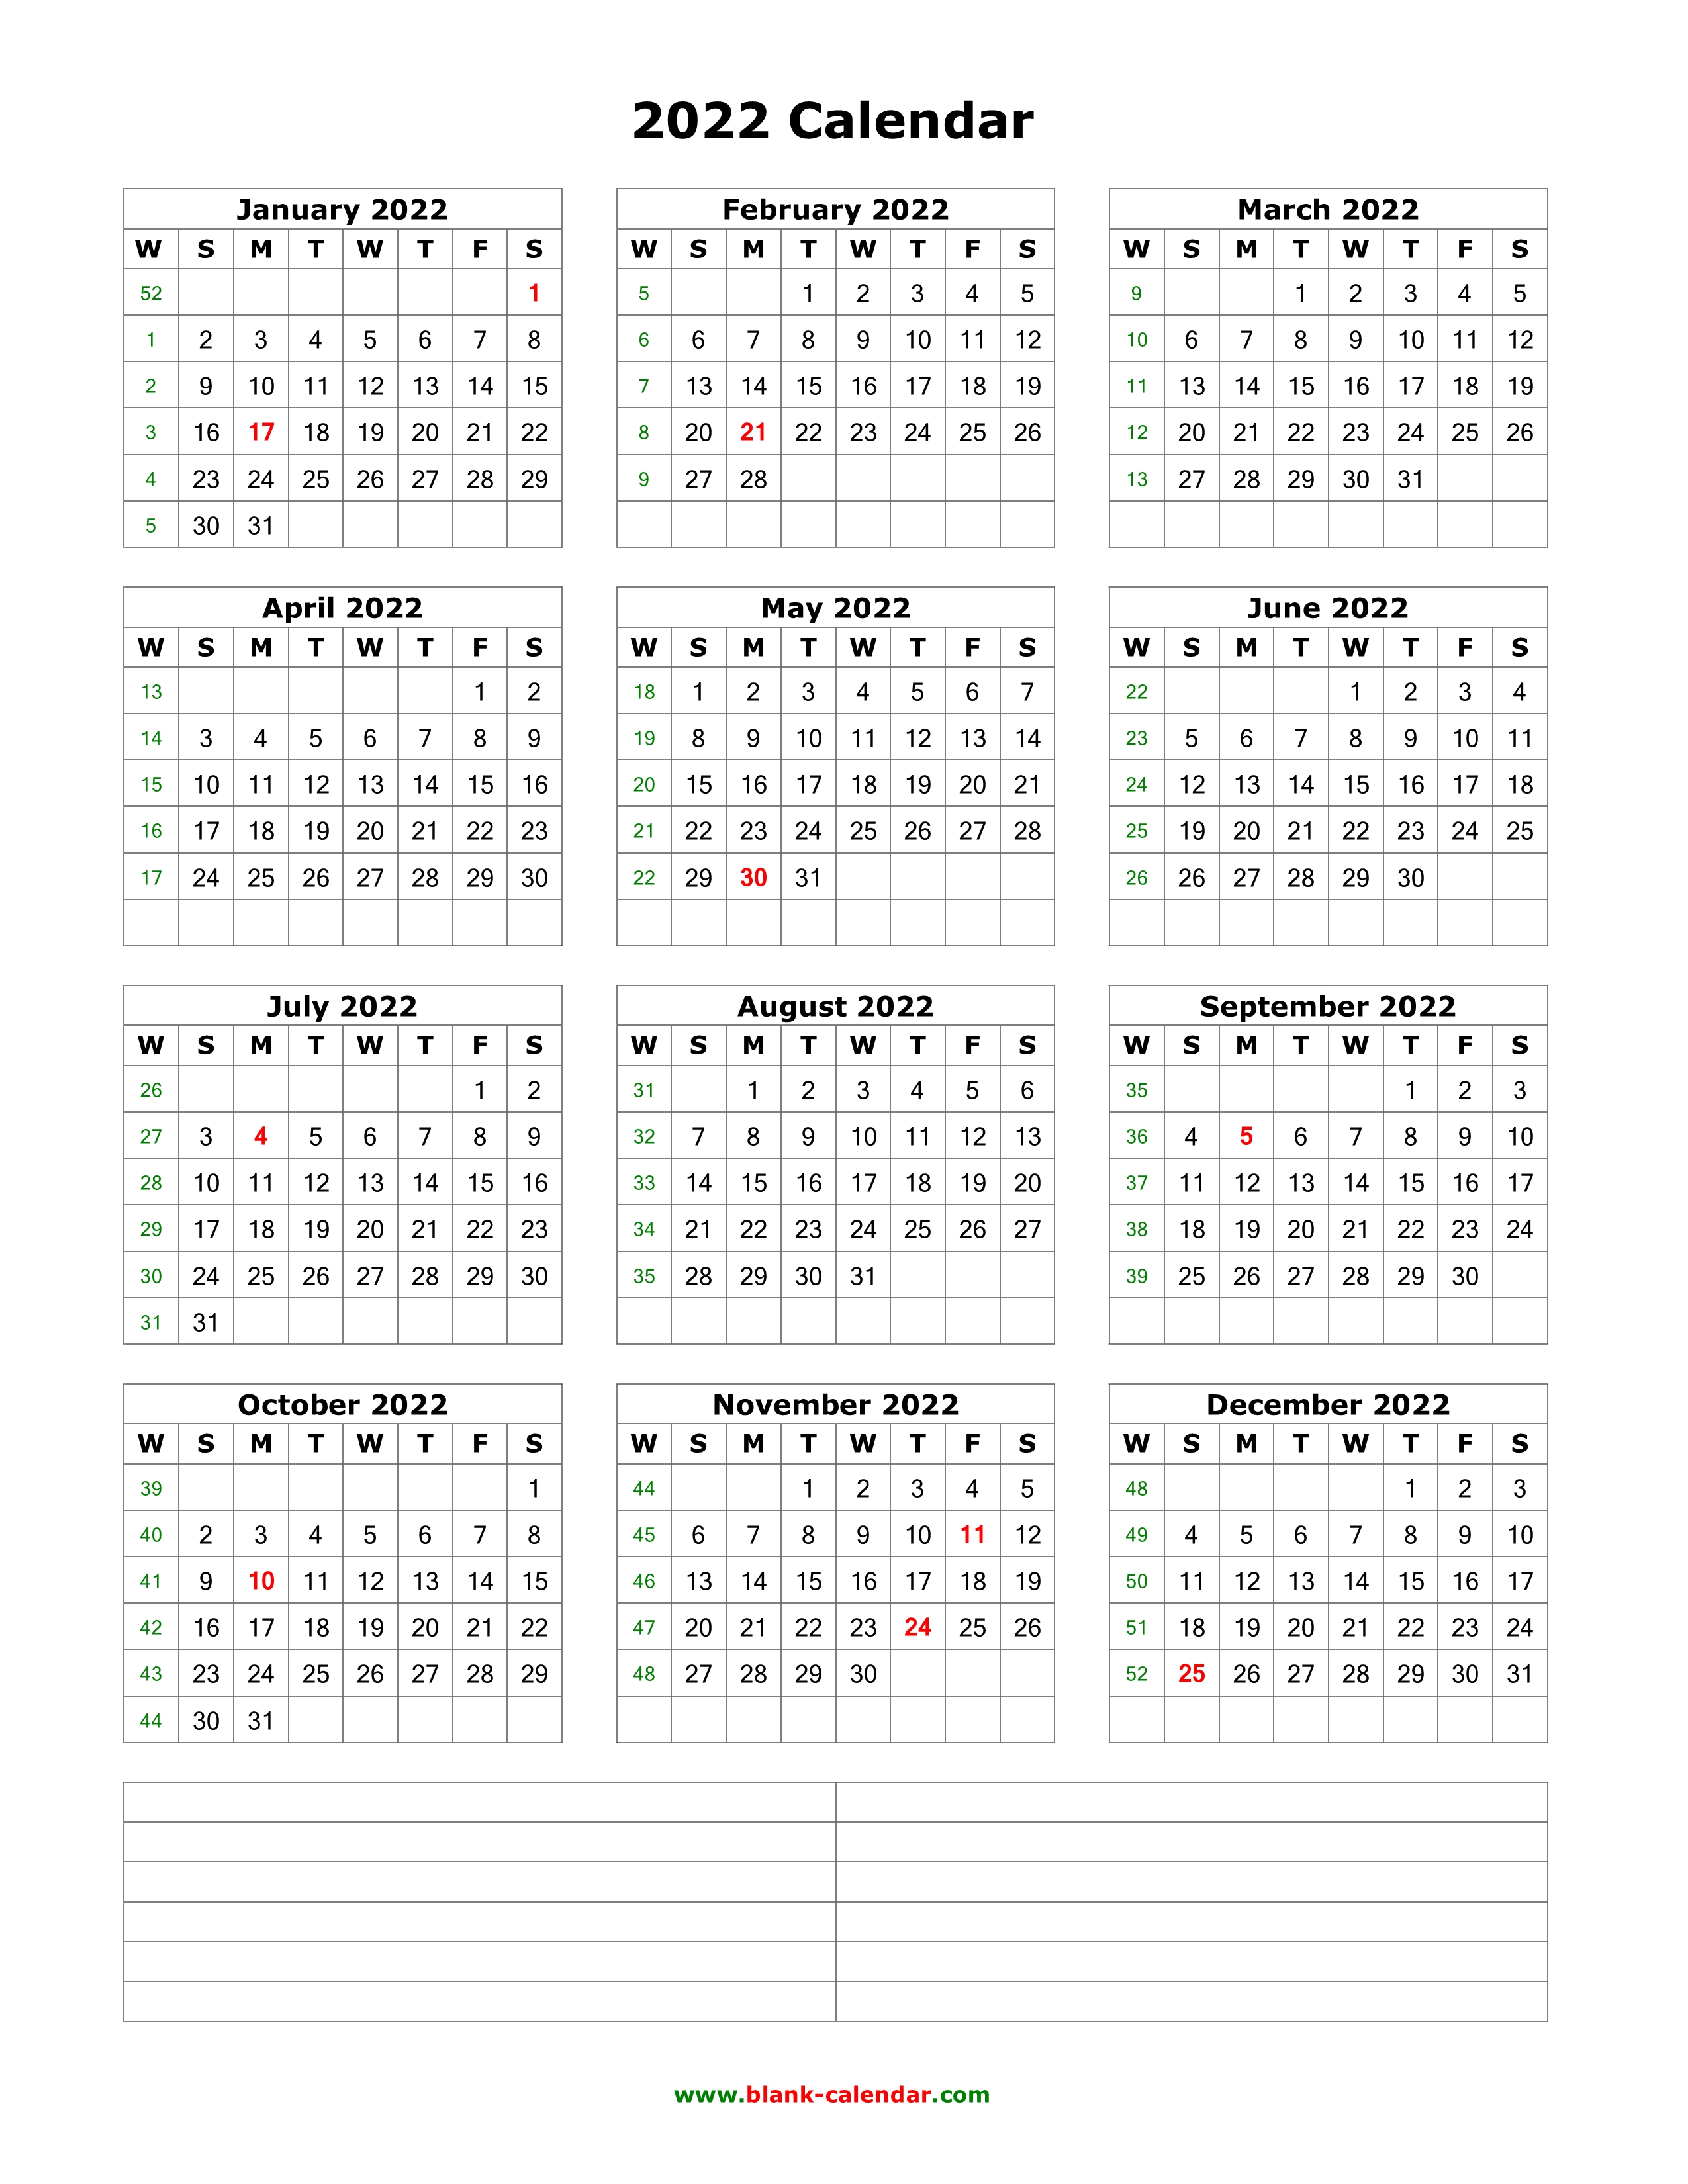 Portrait Calendar 2022 Download Blank Calendar 2022 With Space For Notes (12 Months On One Page,  Vertical)